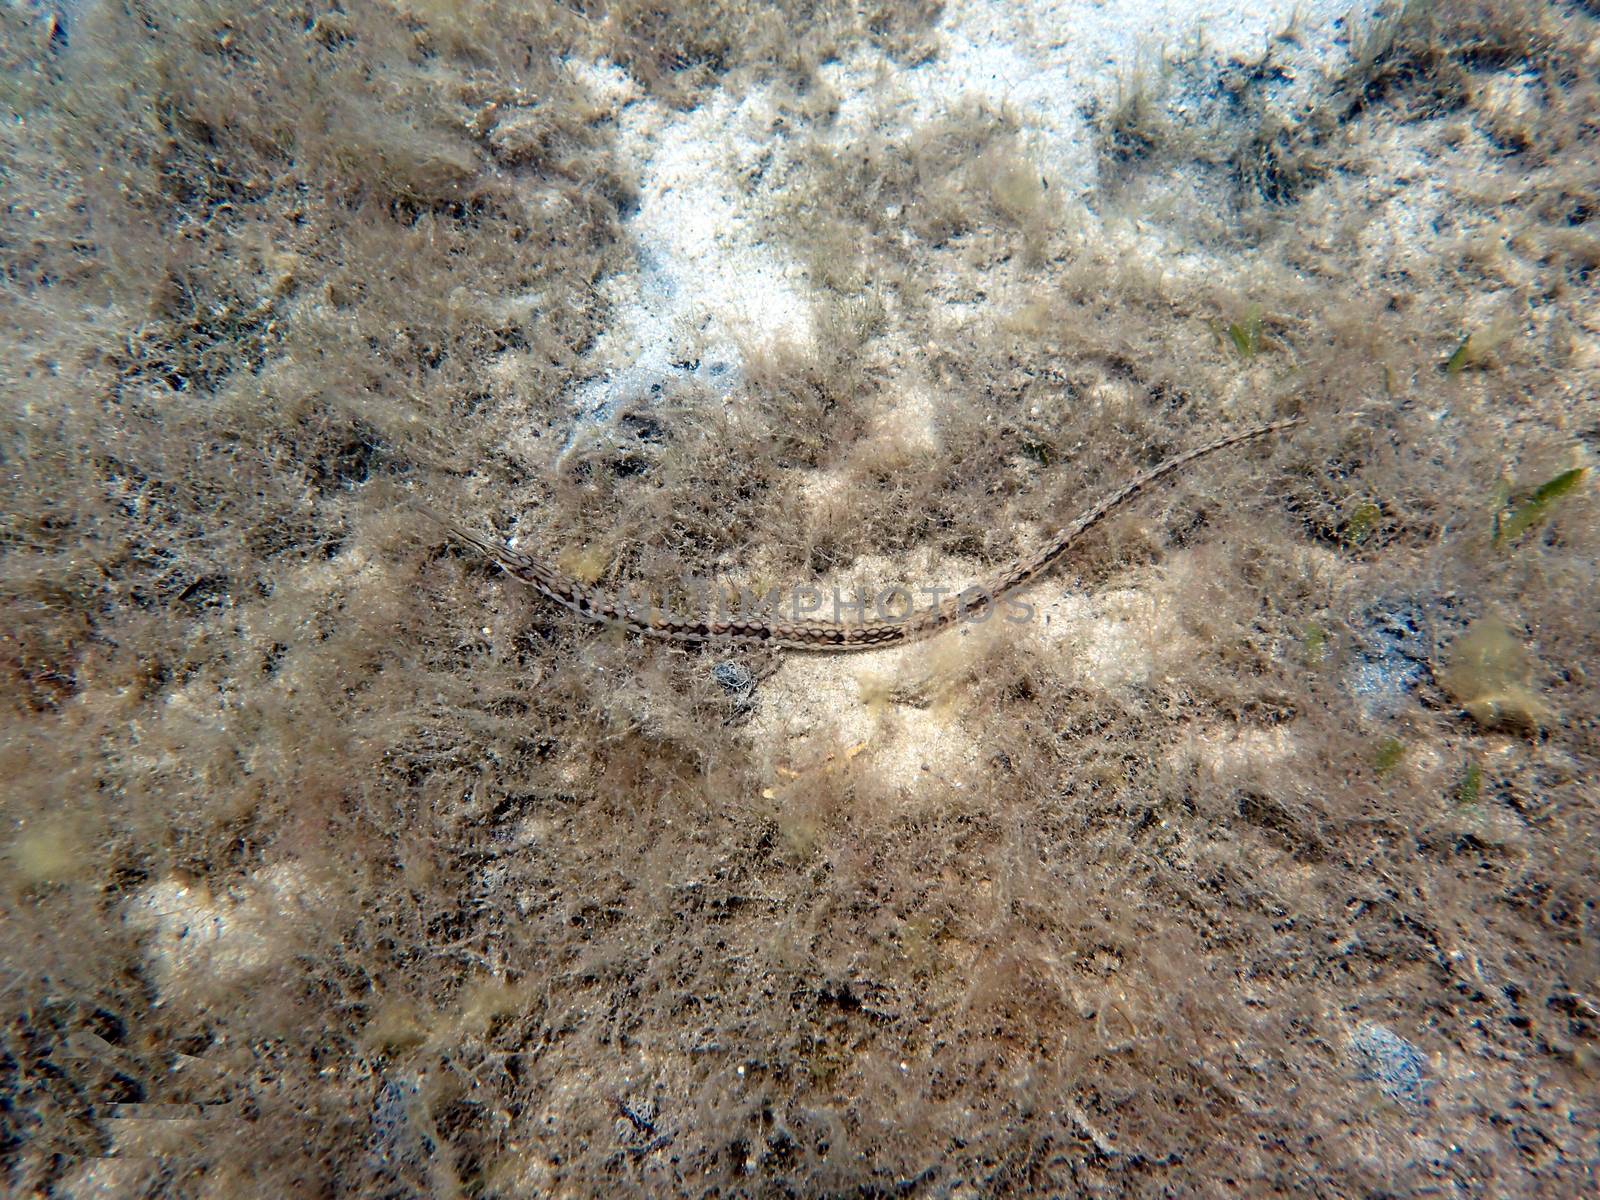 An underwater photo of a Pipefish. by Jshanebutt